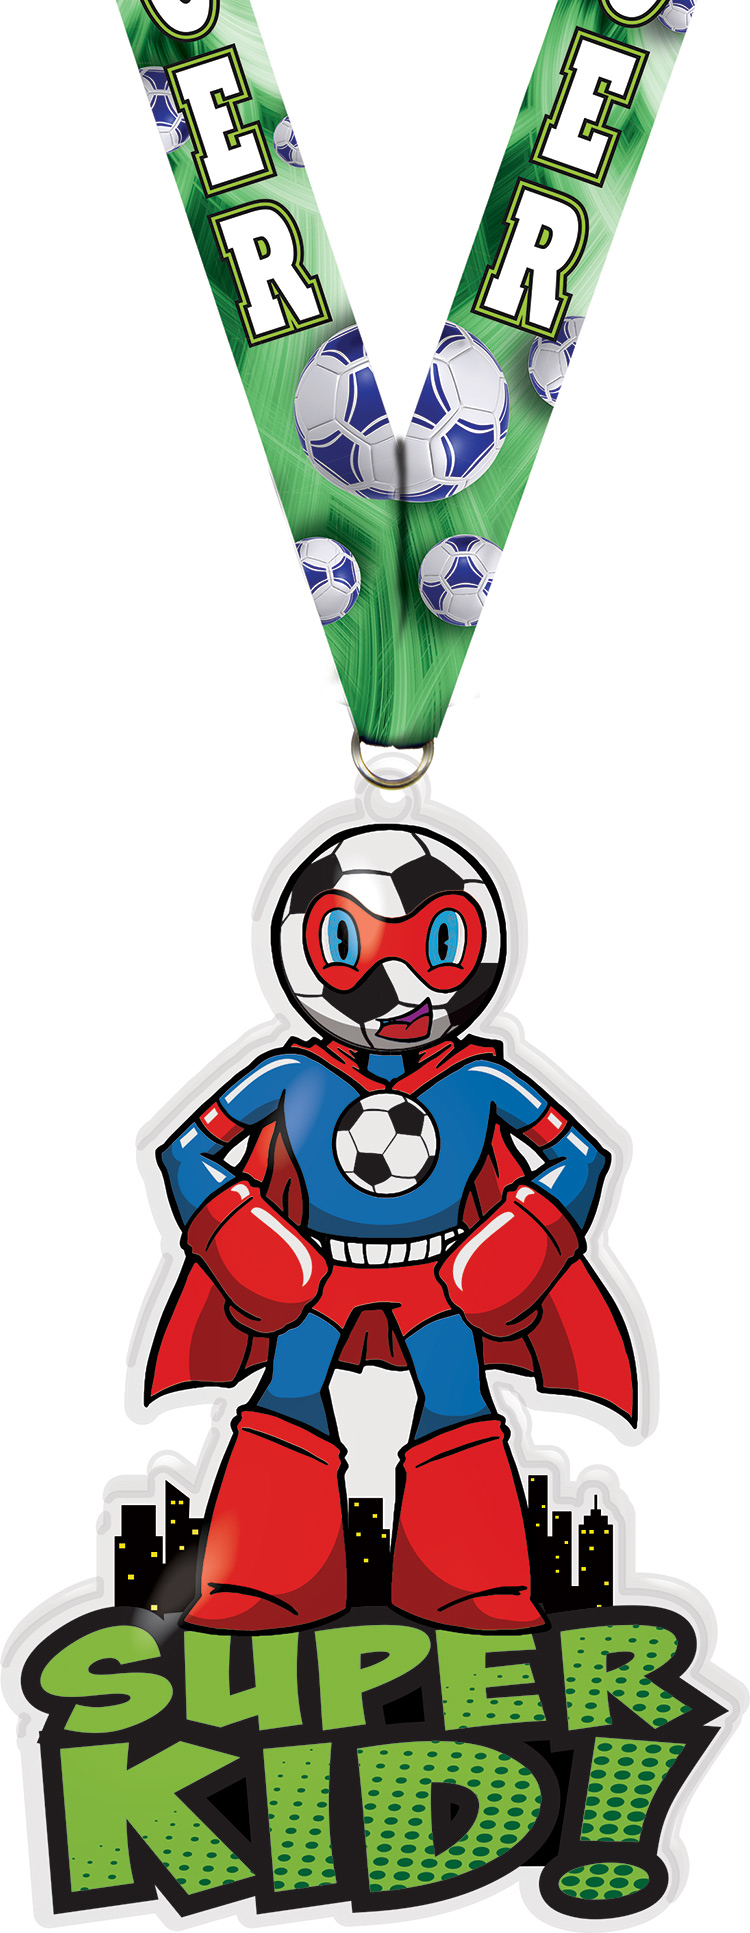 Exclusive Soccer Super Kid Acrylic Medal- 6 inch